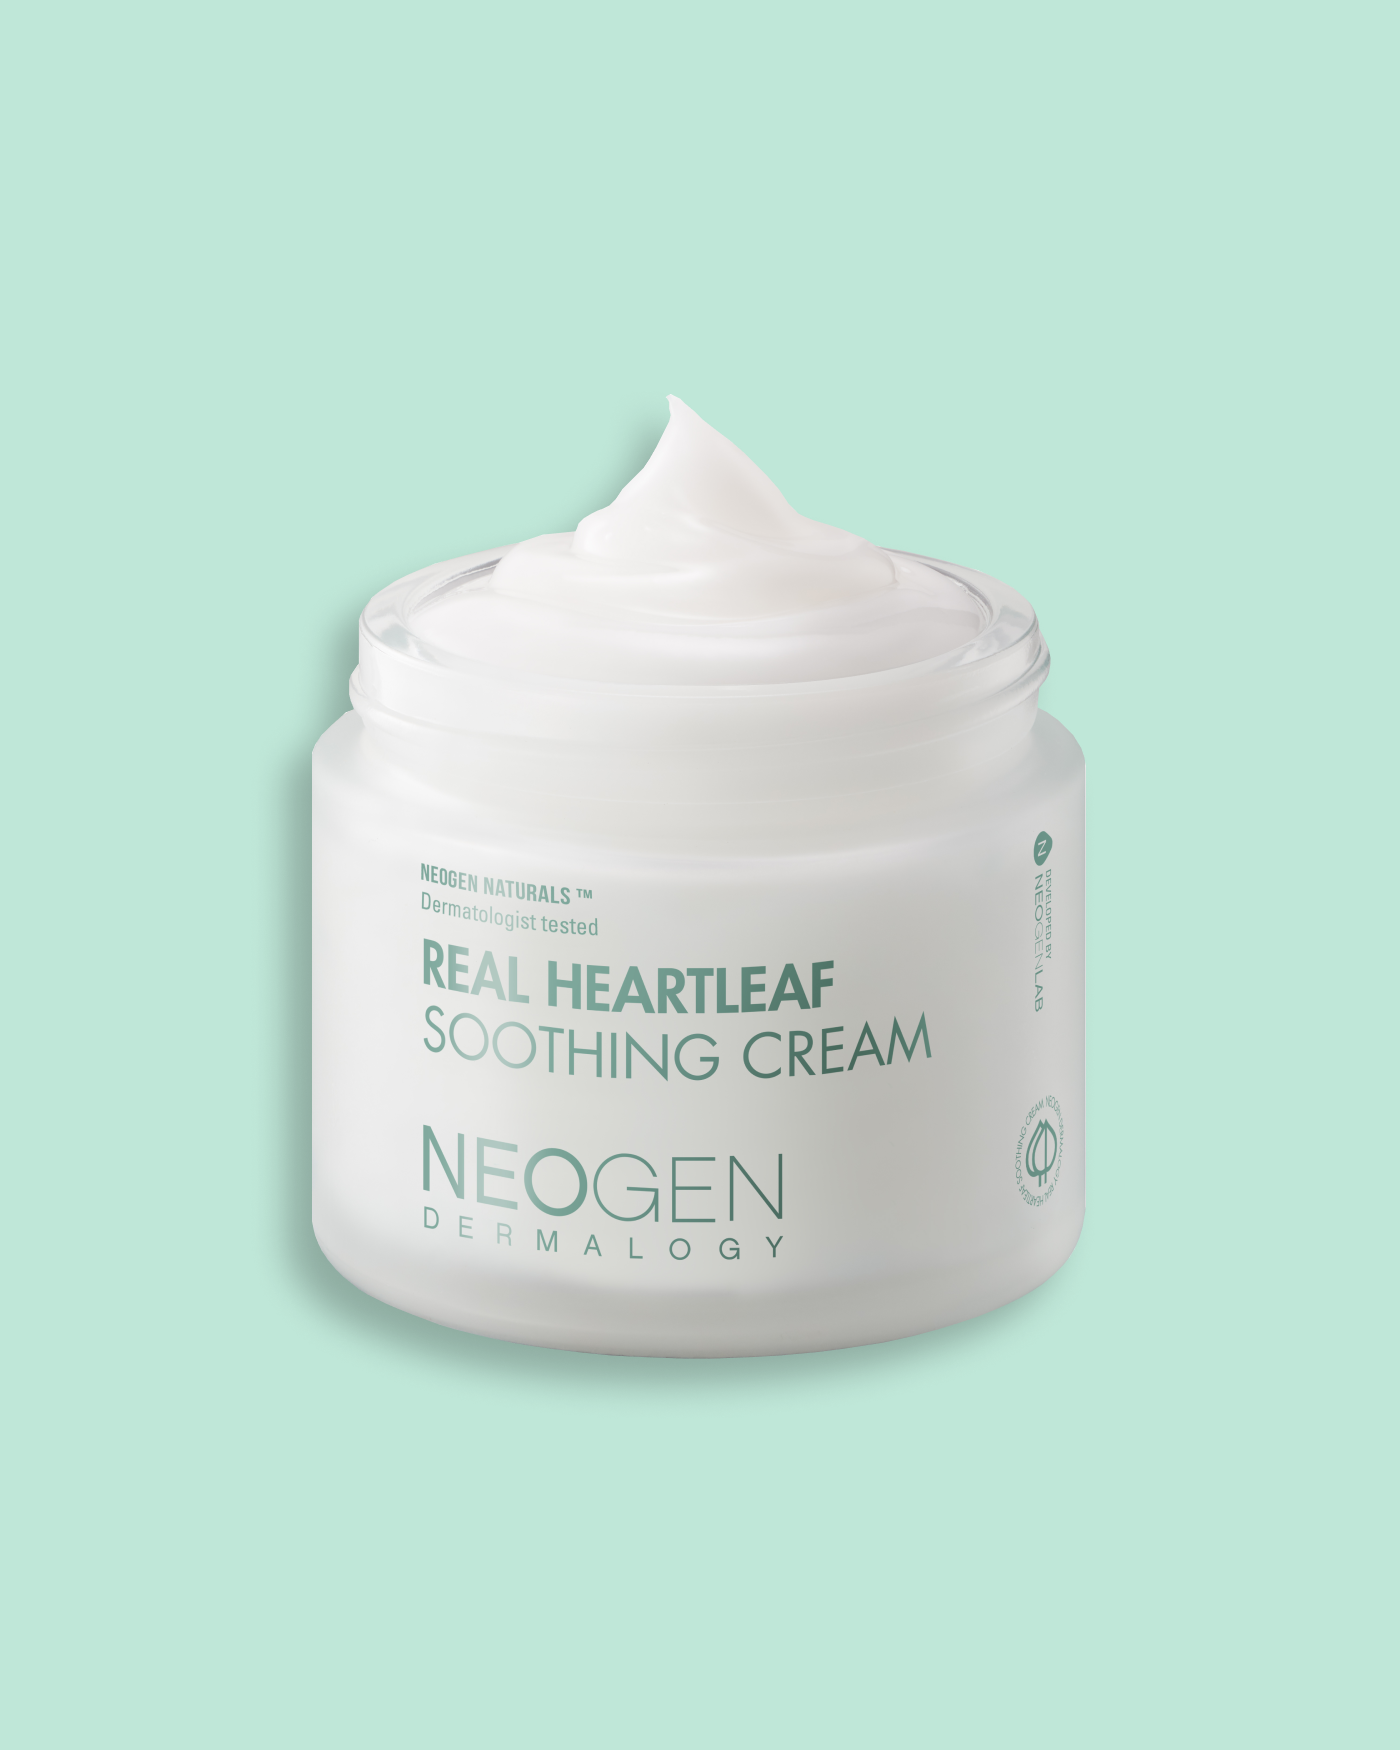 Soko-Glam-PDP-Neogen-Real-Heartleaf-Soothing-Cream-01